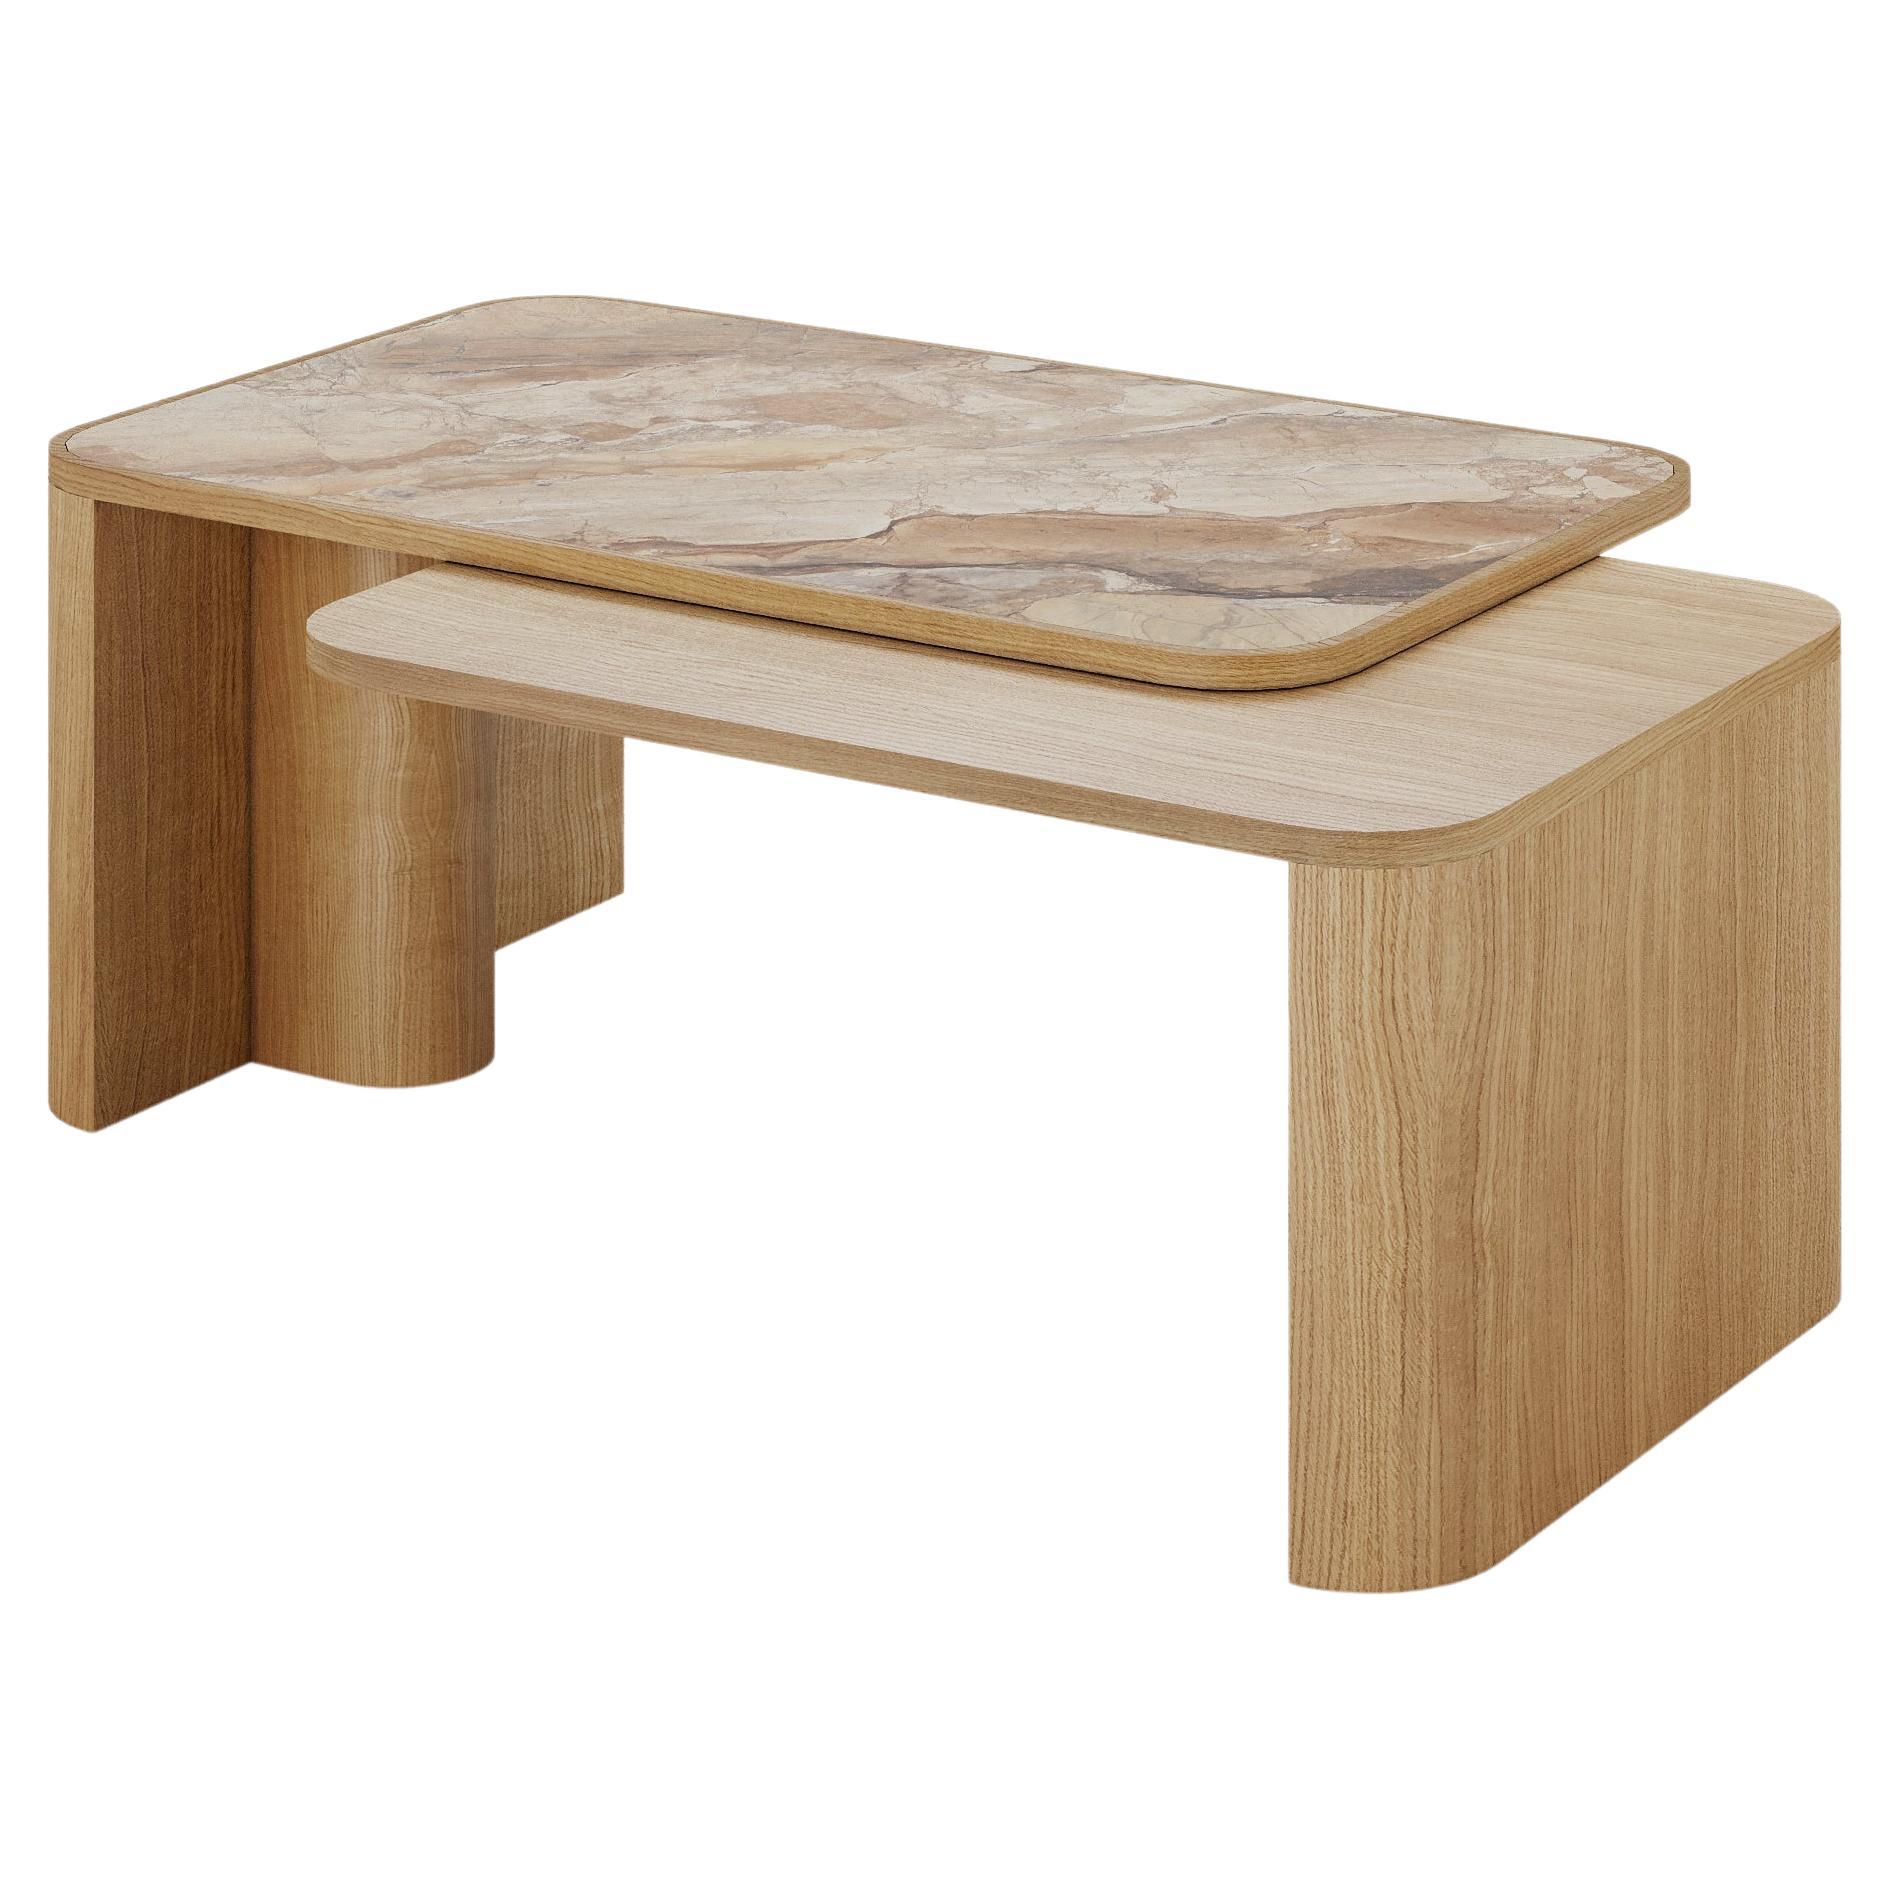 ZAGAS Statera Coffee Table For Sale